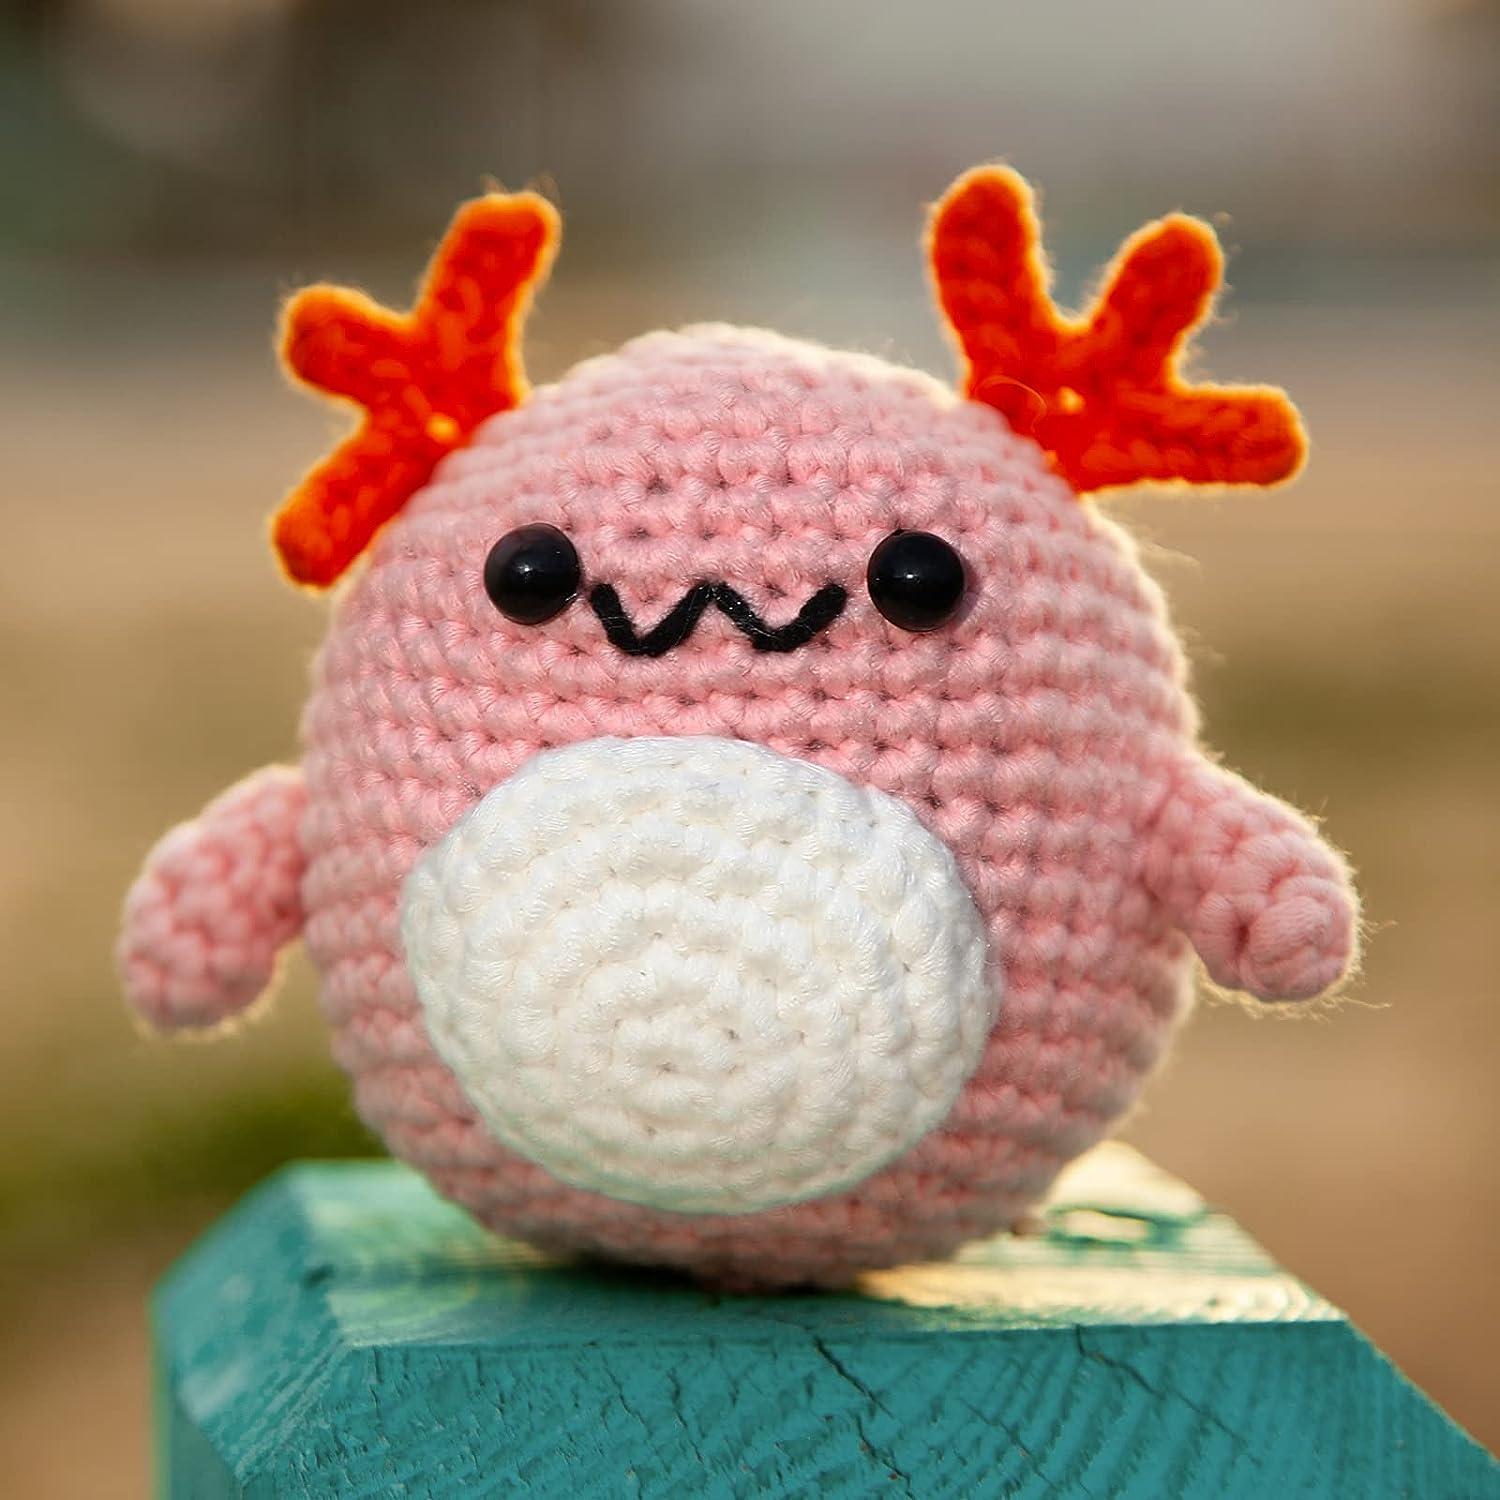 loveknotpop Crochet Kit for Beginners: Animal Crochet Kit for Adults, Kids,  Teens, Cute Axolotl, Include All You Need, Easy Knitting Soft Yarn,  Step-by-Step Tutorial, Birthday Easter Mother Day Gift.